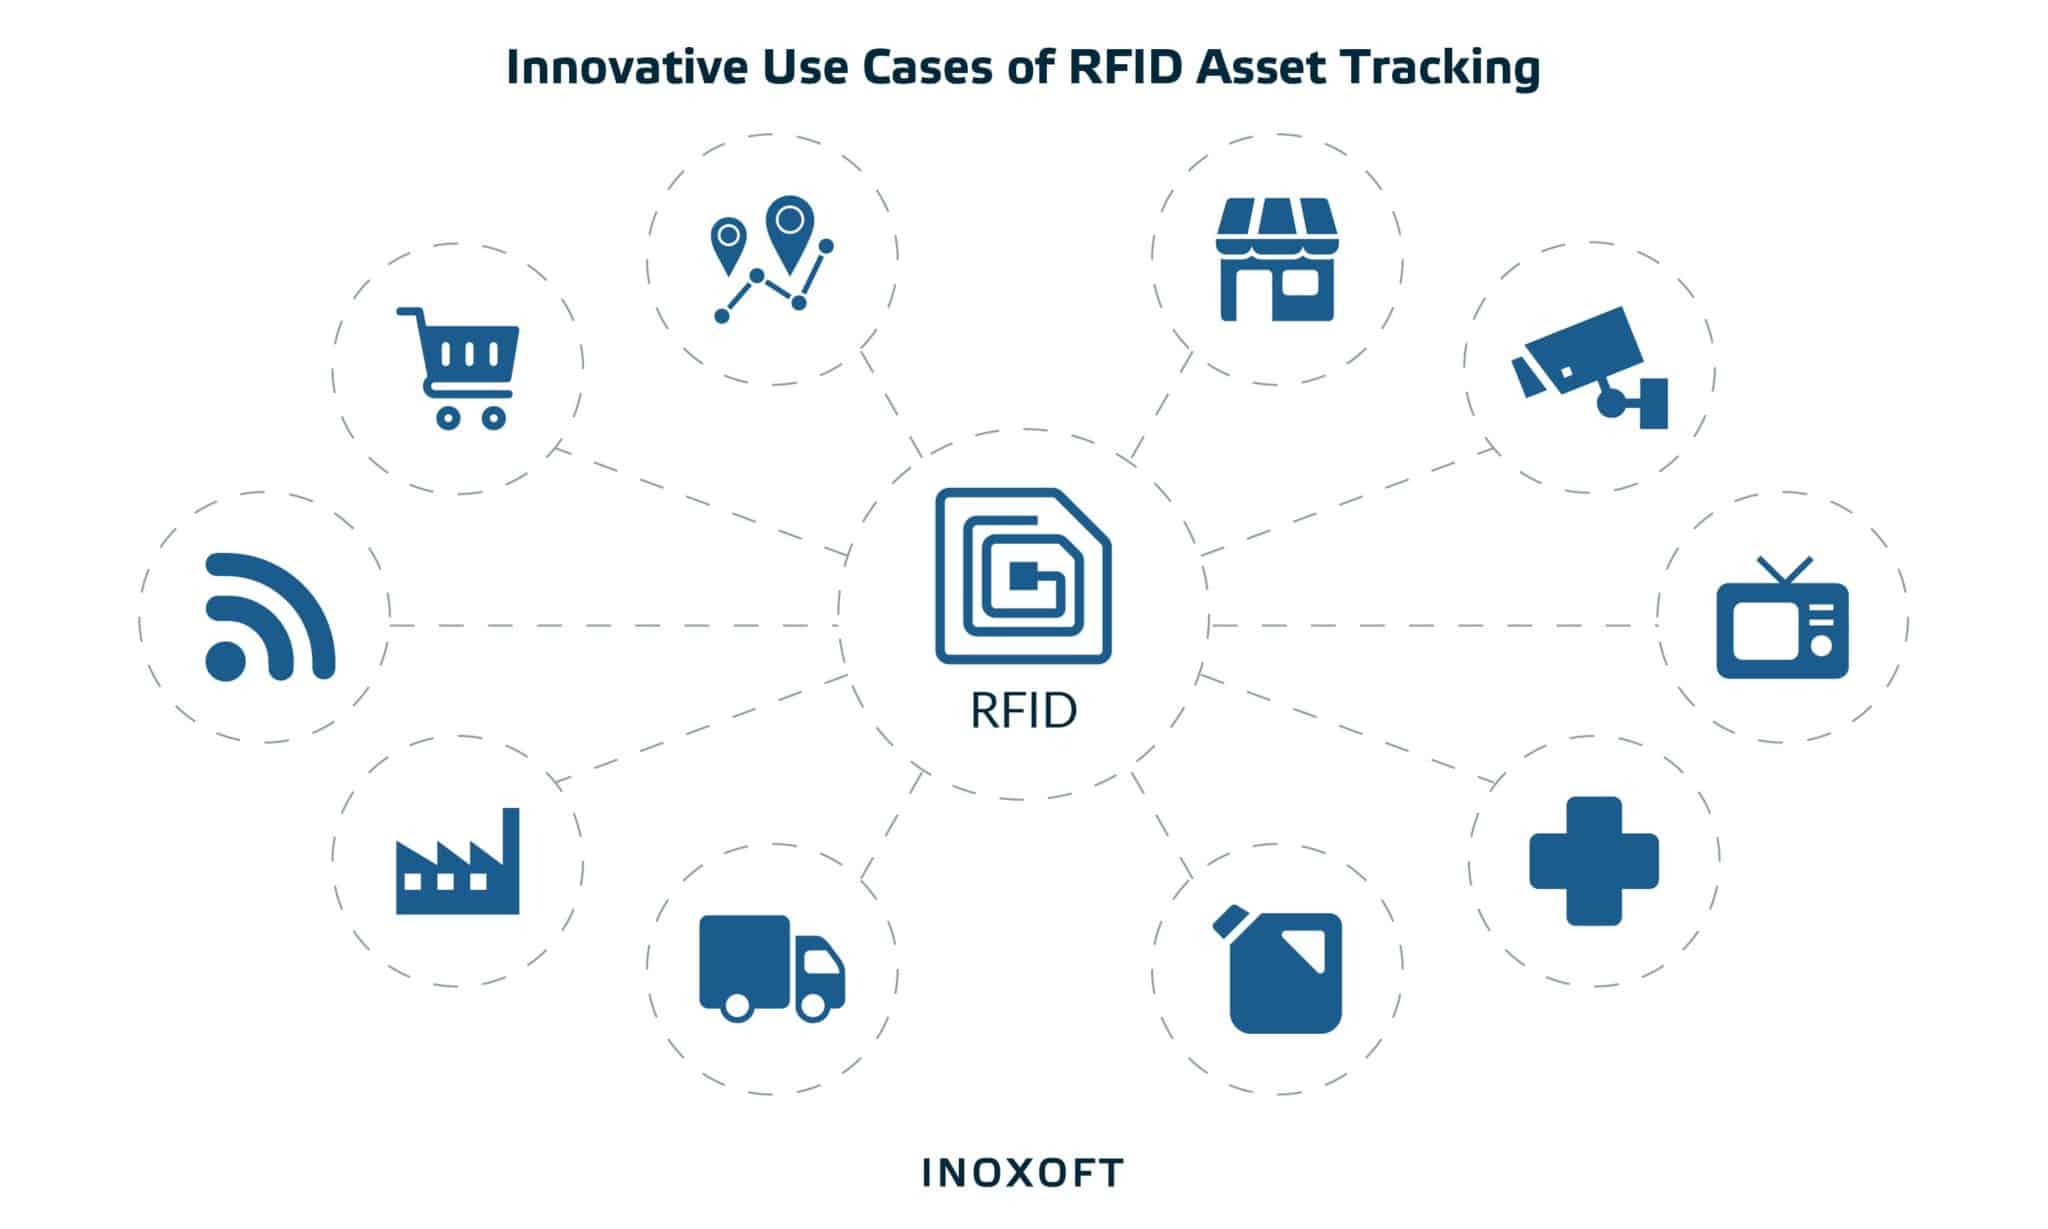 Use Cases of RFID Asset Tracking